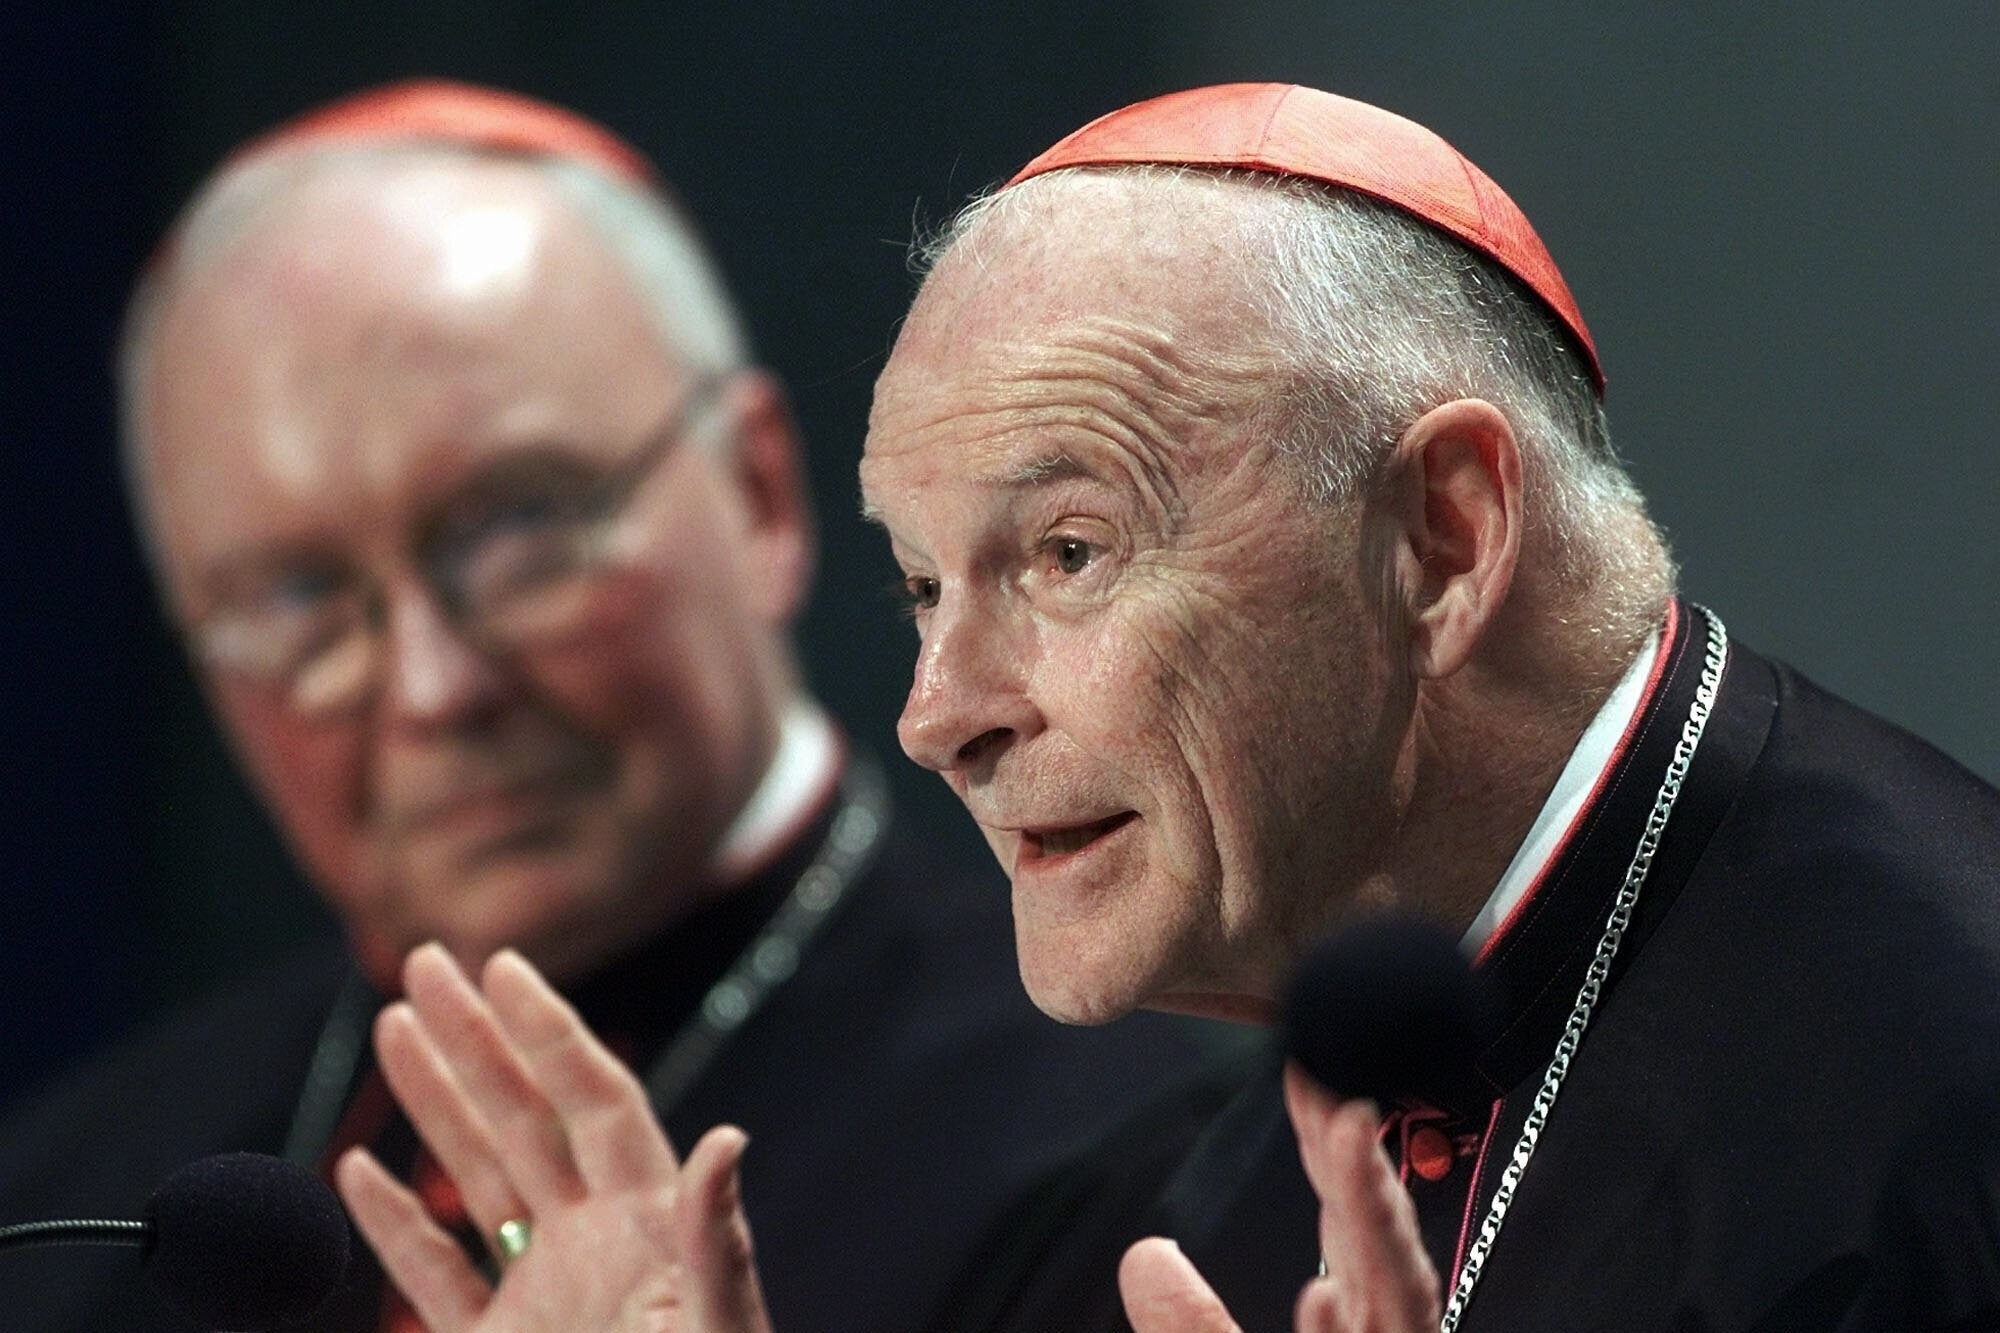 Theodore McCarrick, right, pictured while archbishop of Washington in 2002. Photo: AP